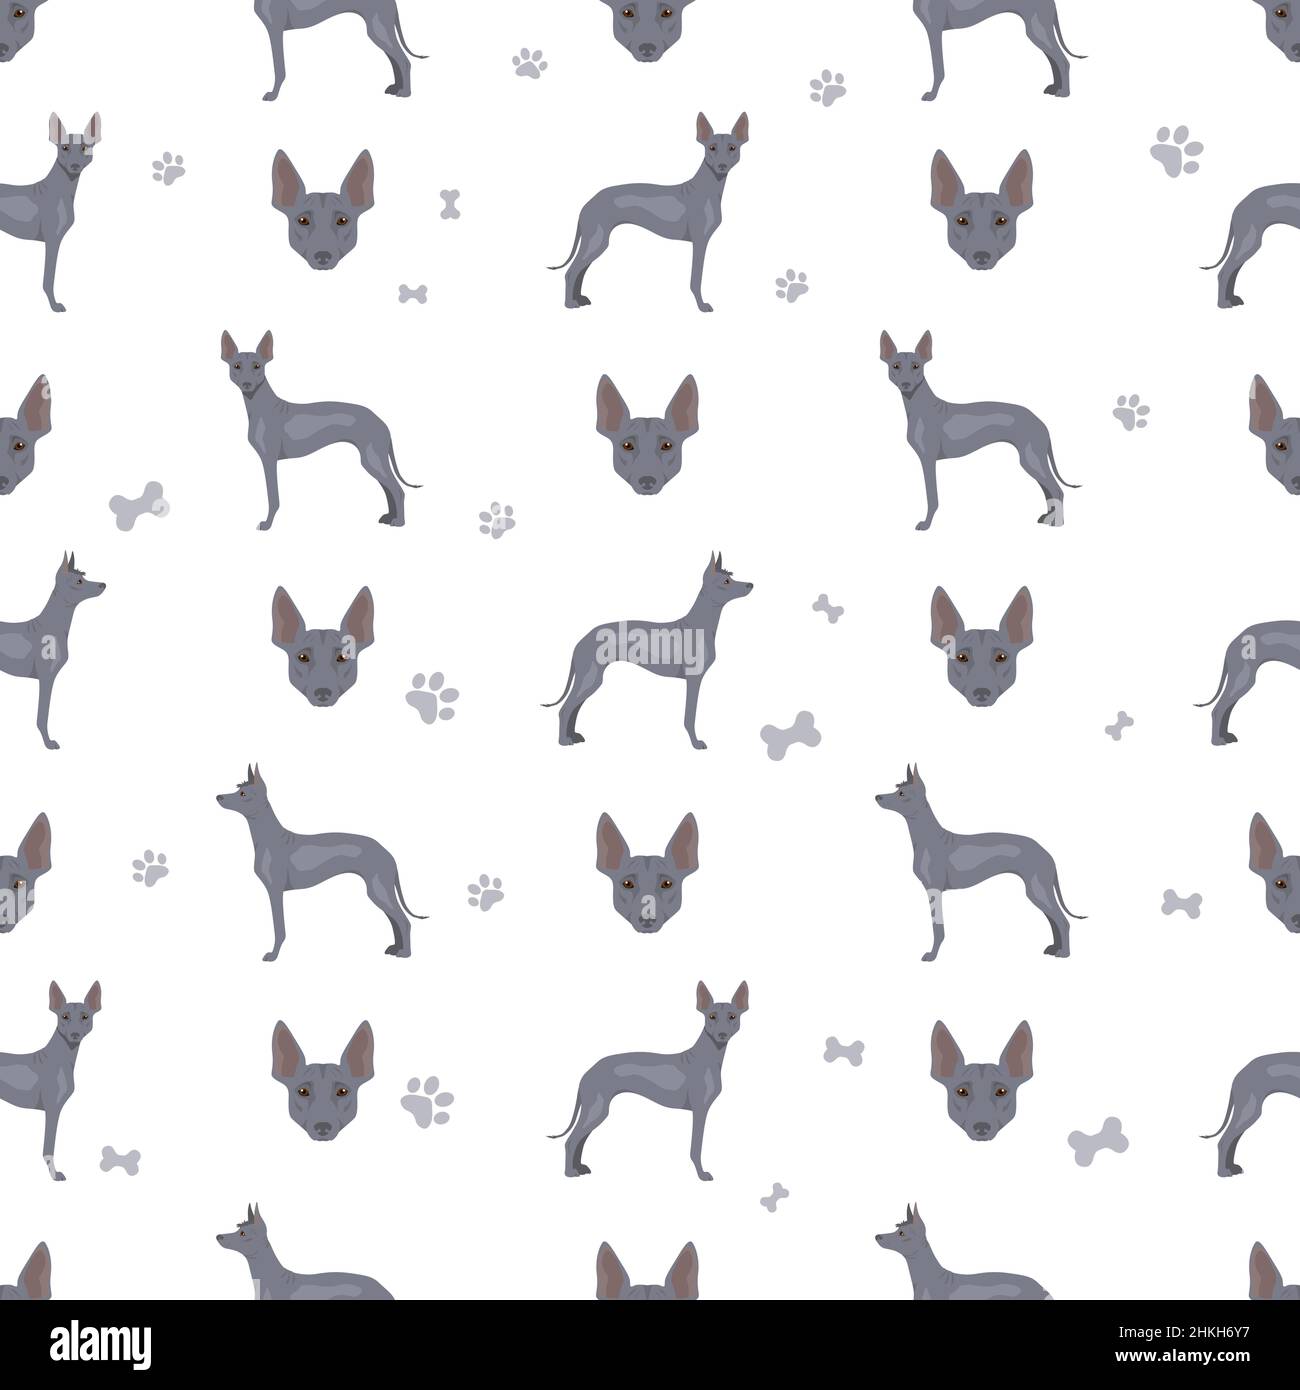 Peruvian hairless dog seamless pattern. Different poses, coat colors set.  Vector illustration Stock Vector